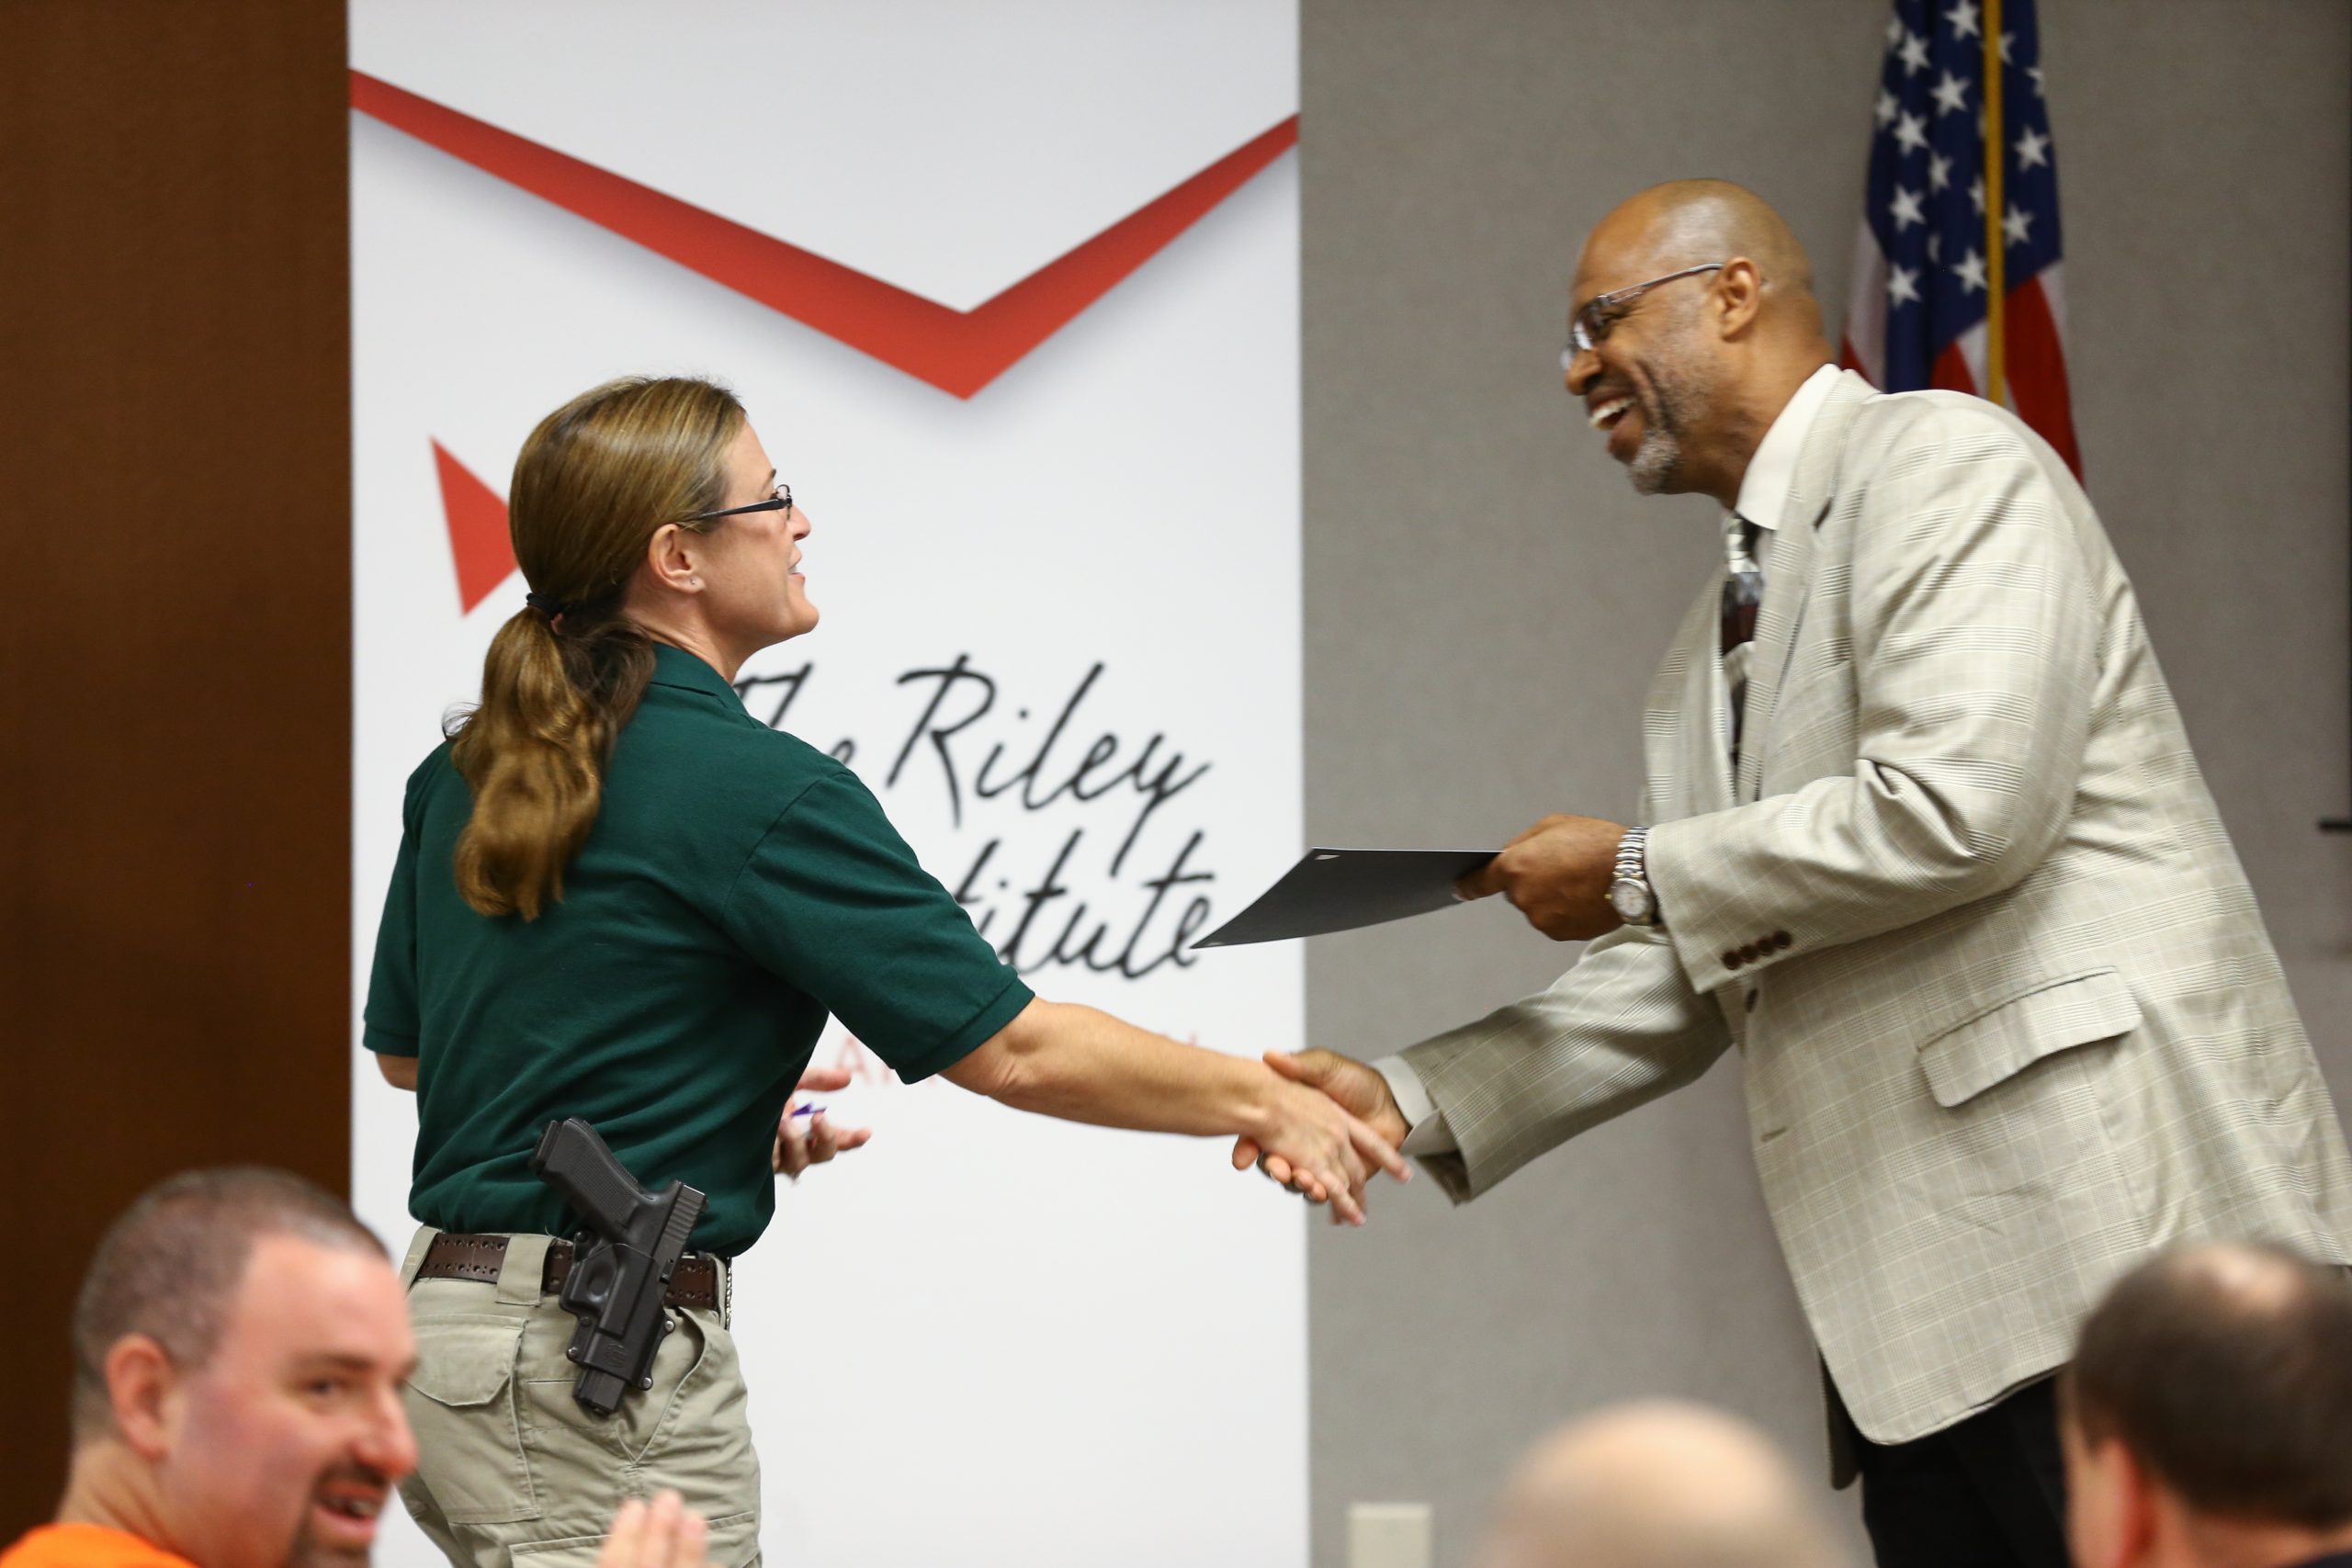 Juan Johnson presenting the Riley Fellow certificate to Selena Small, Horry